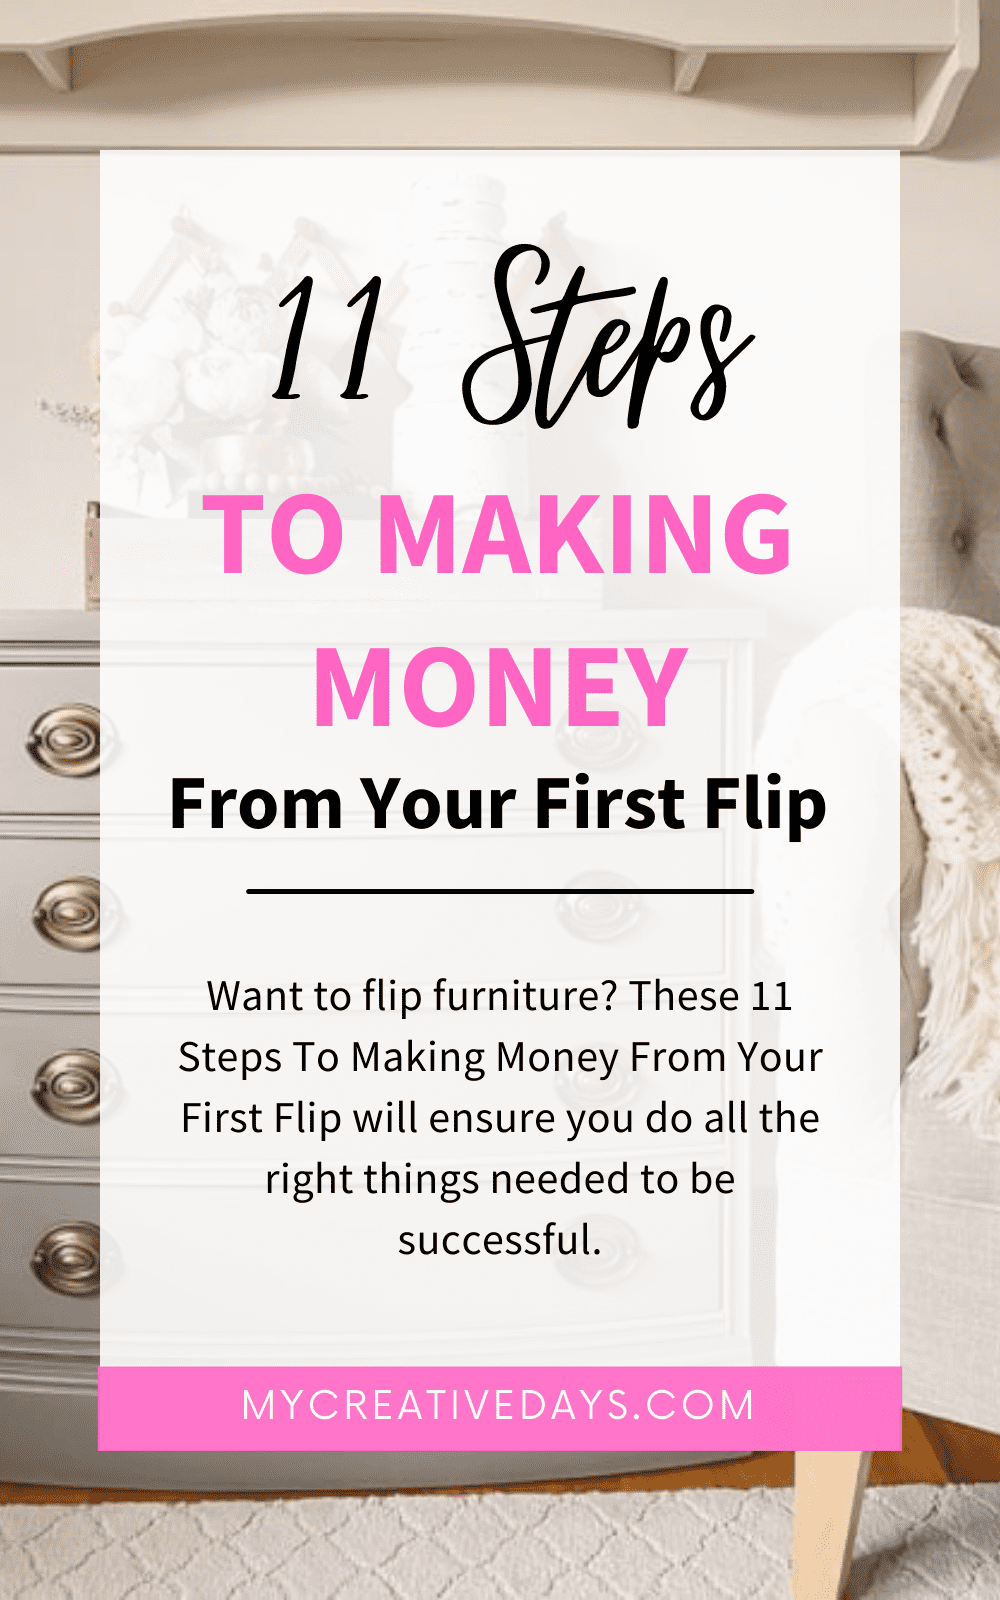 Want to flip furniture? These 11 Steps To Making Money From Your First Flip will ensure you do all the right things needed to be successful.